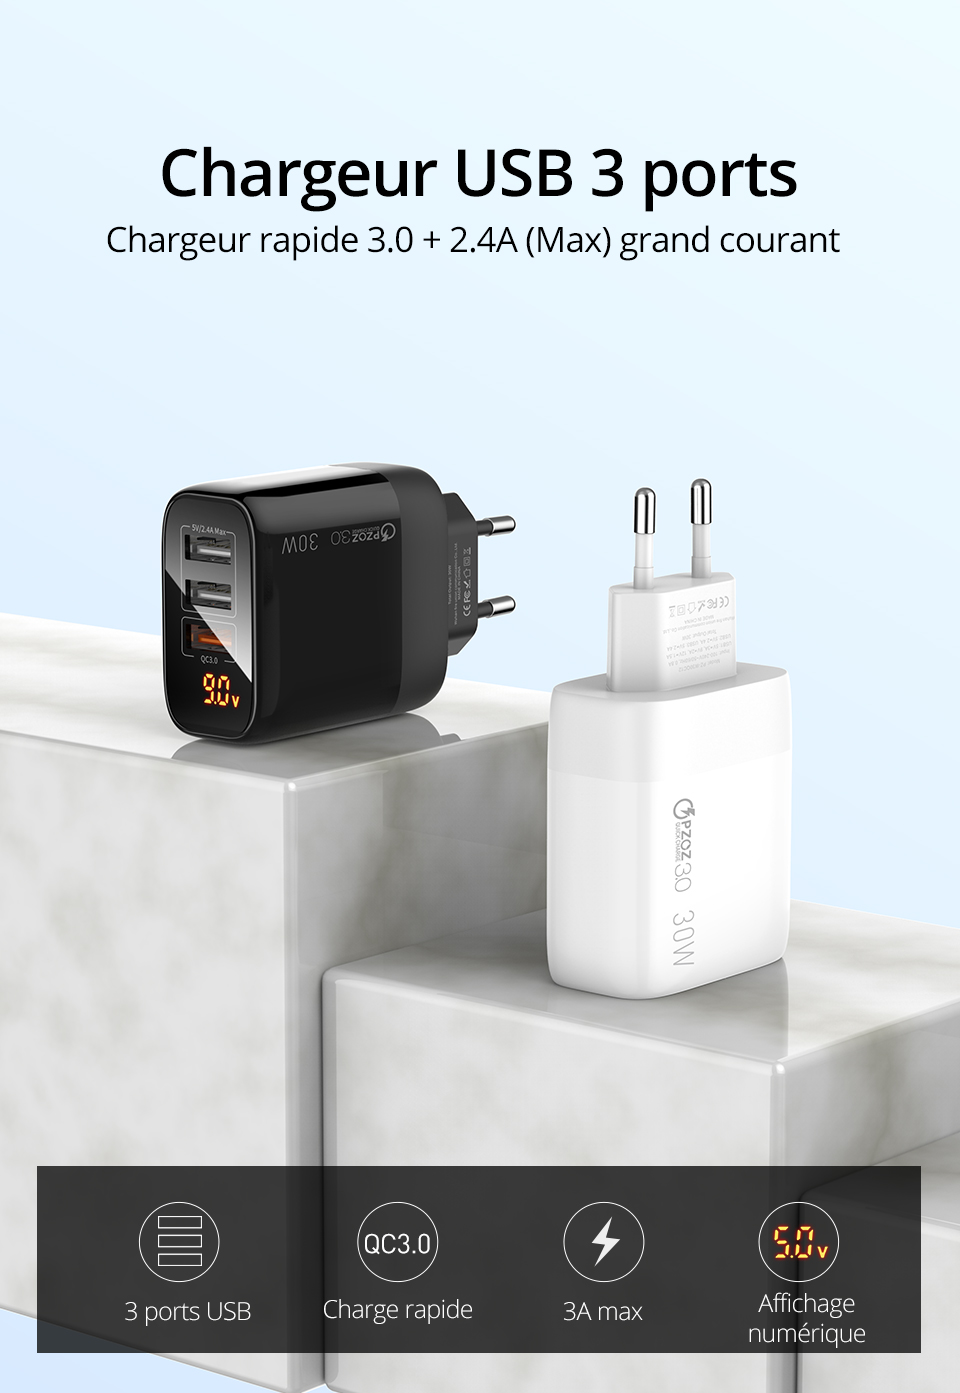 Chargeur USB PZOZ 30W Charge rapide 18W Charge rapide 3.0 affichage LED adaptateur mural pour iphone 11 Samsung A50 xiaomi redmi note8